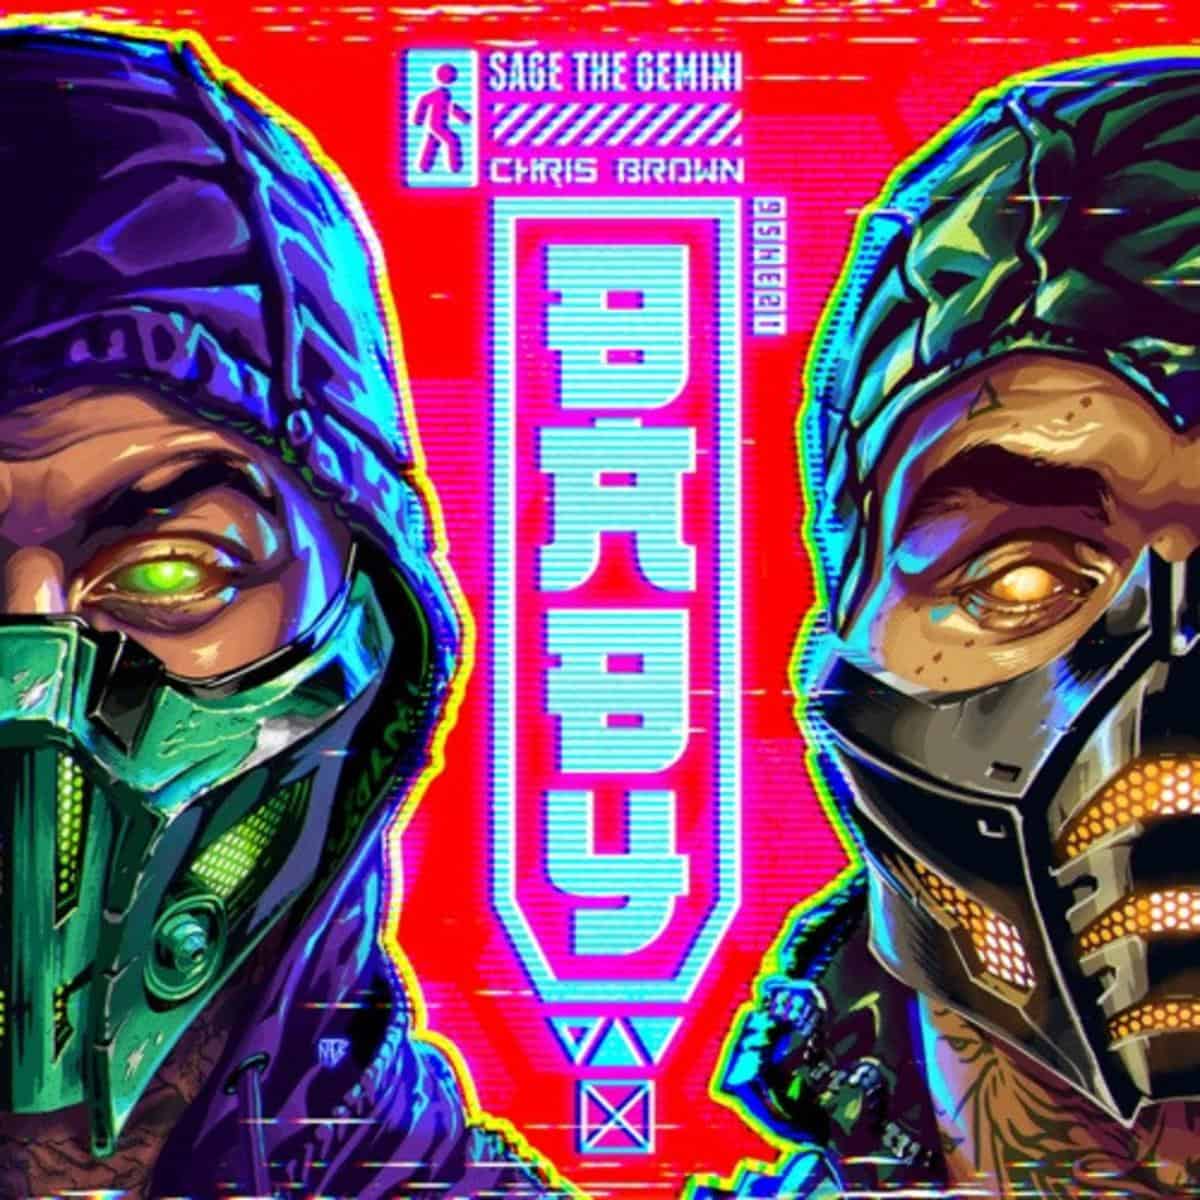 Sage The Gemini & Chris Brown Drops A New Song Baby